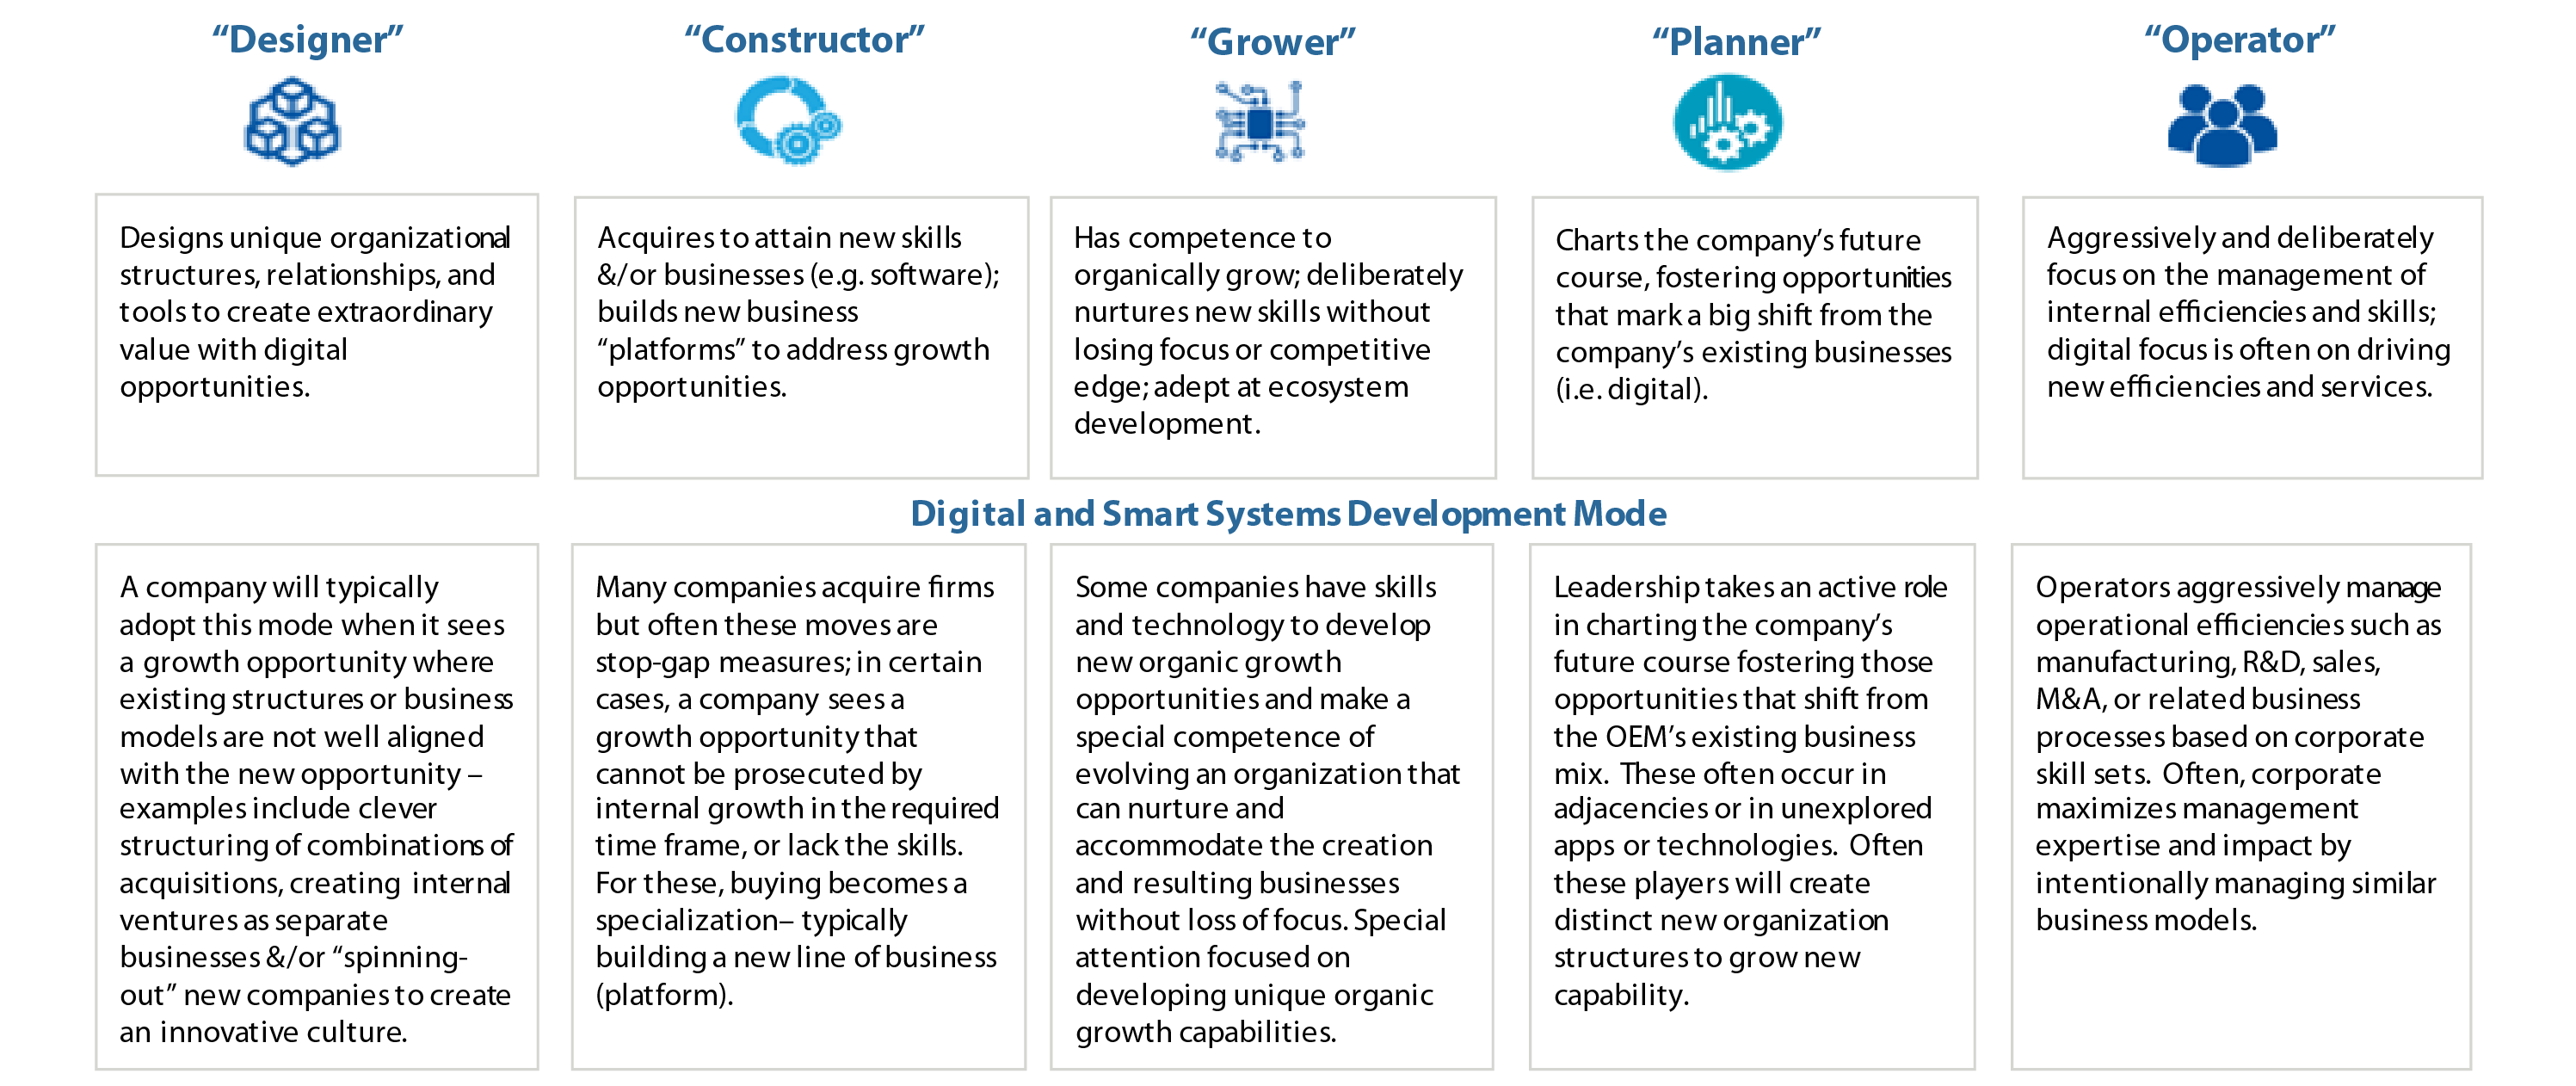 The Death and Disintegration of Conglomerates | Digital and Smart Systems Roles for Growth Models